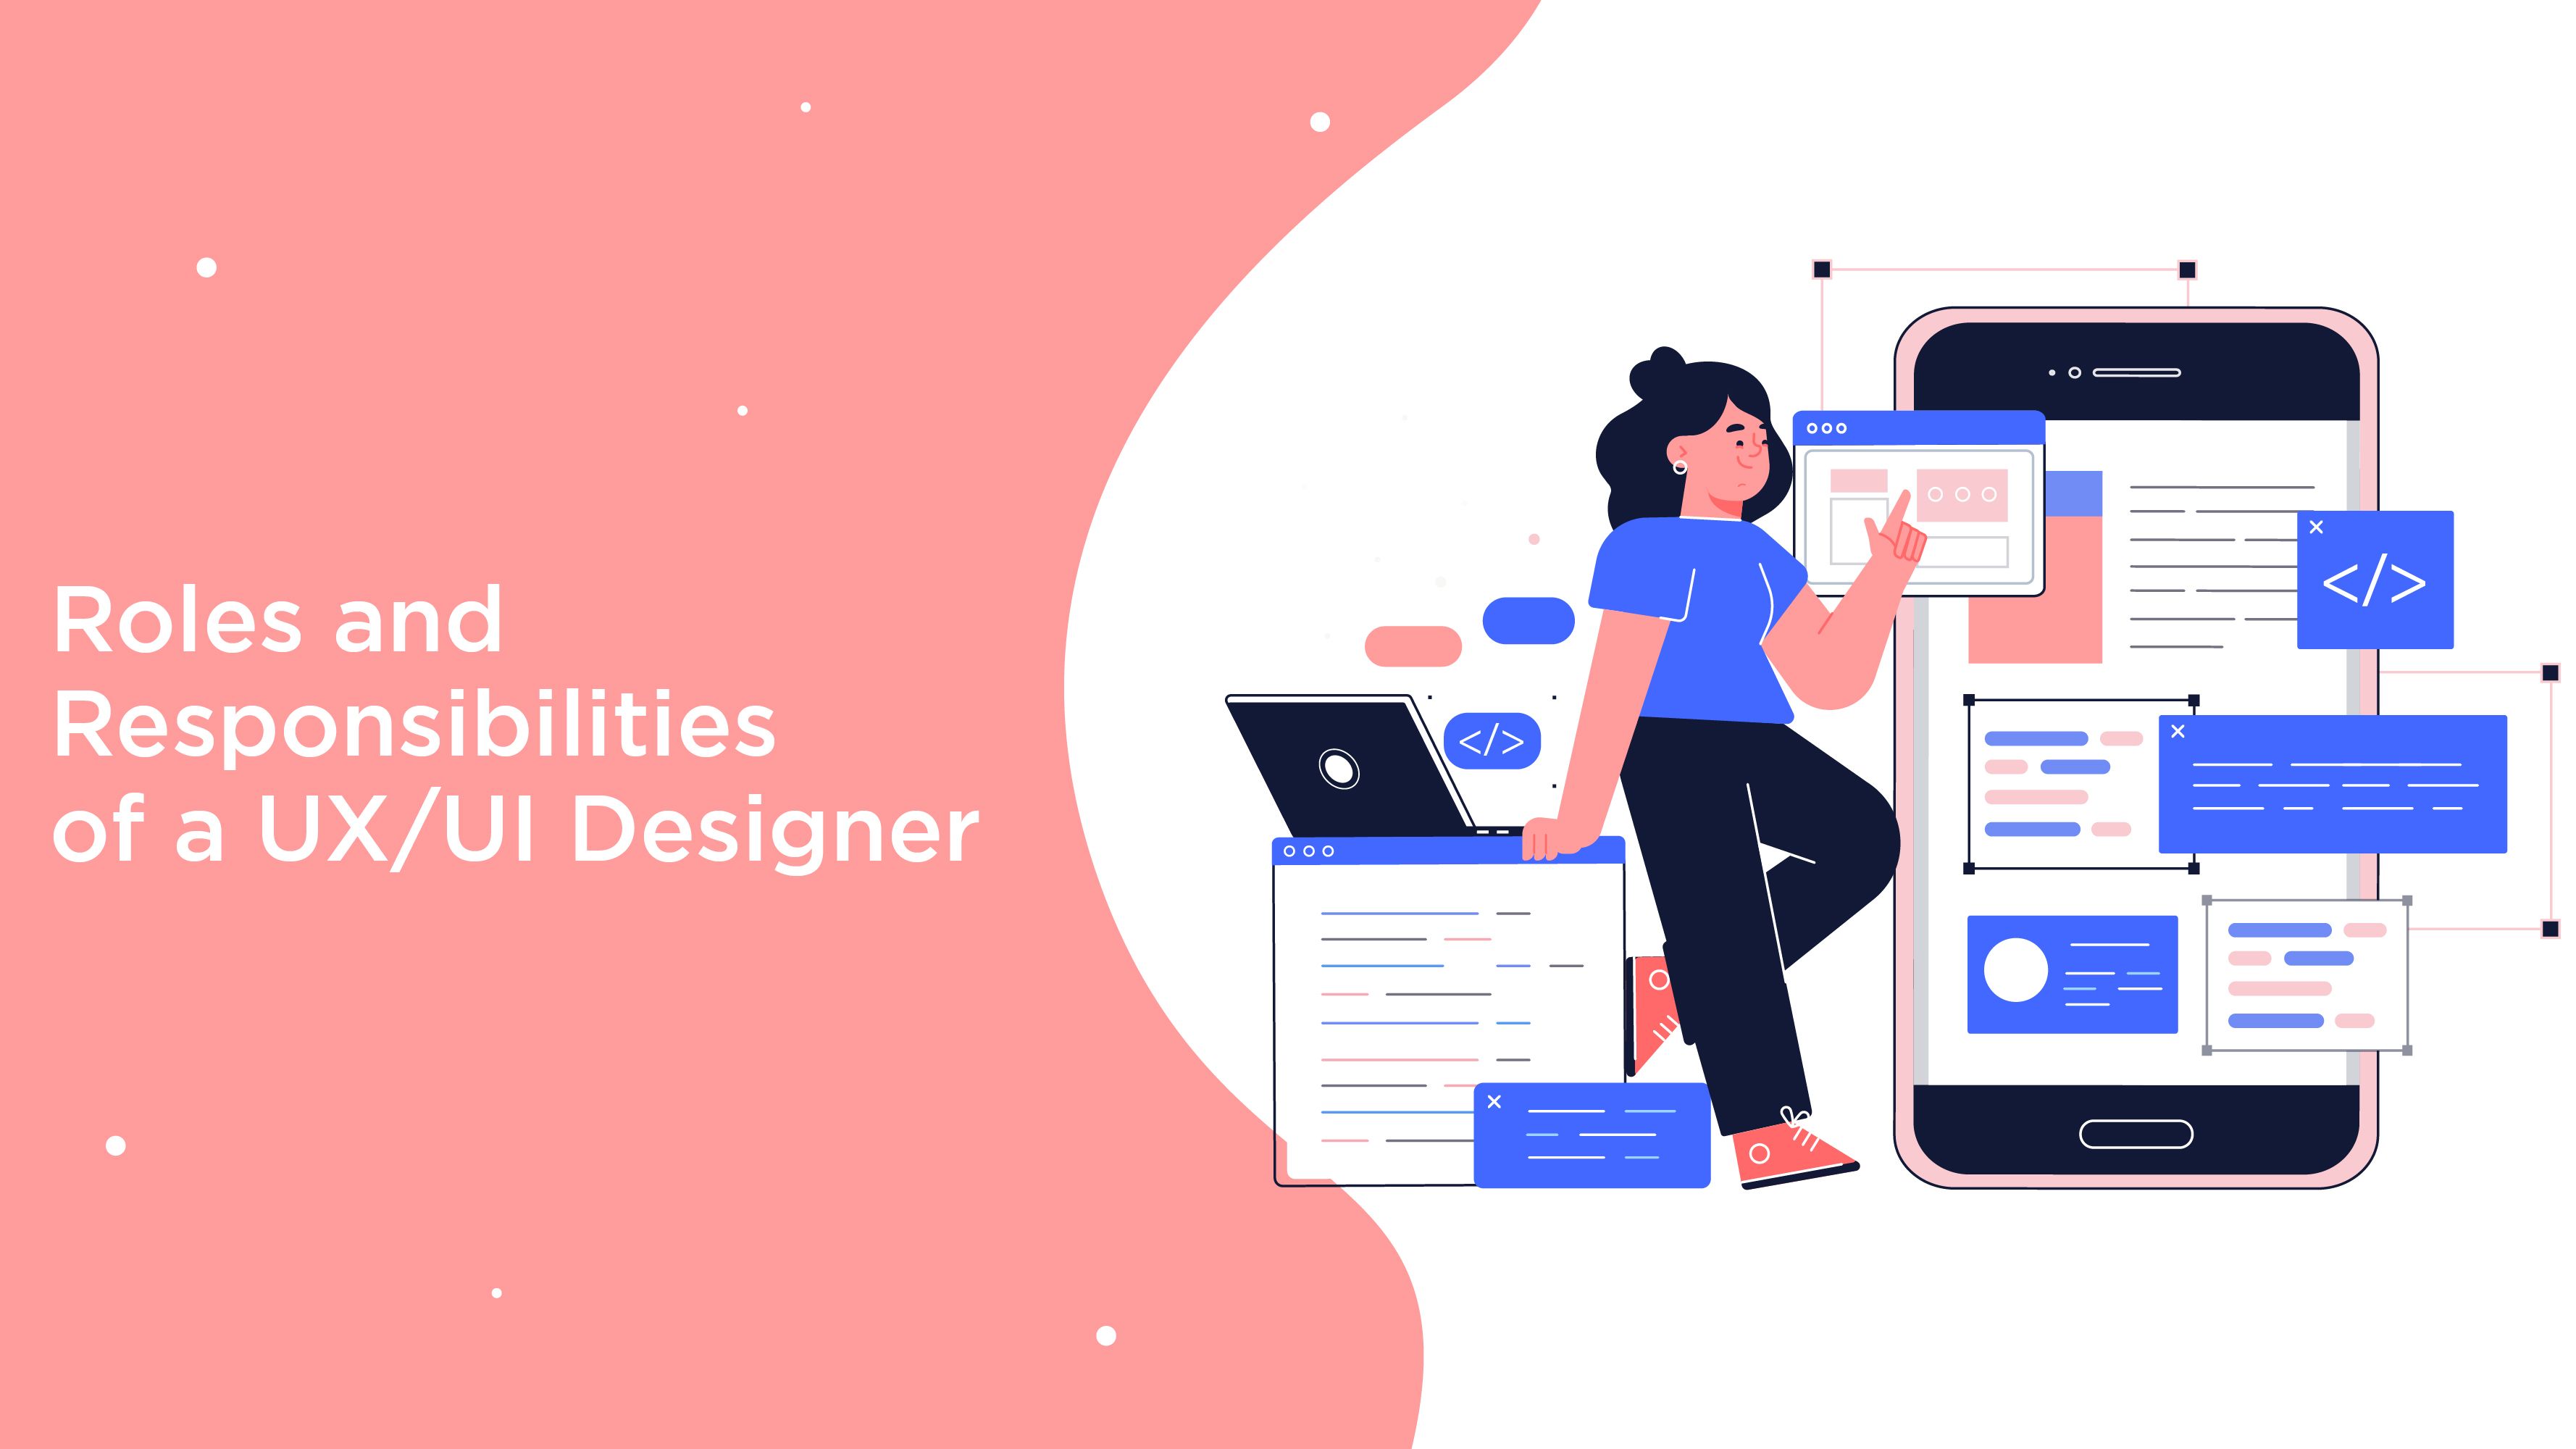 Roles And Responsibilities Of A UX/UI Designer